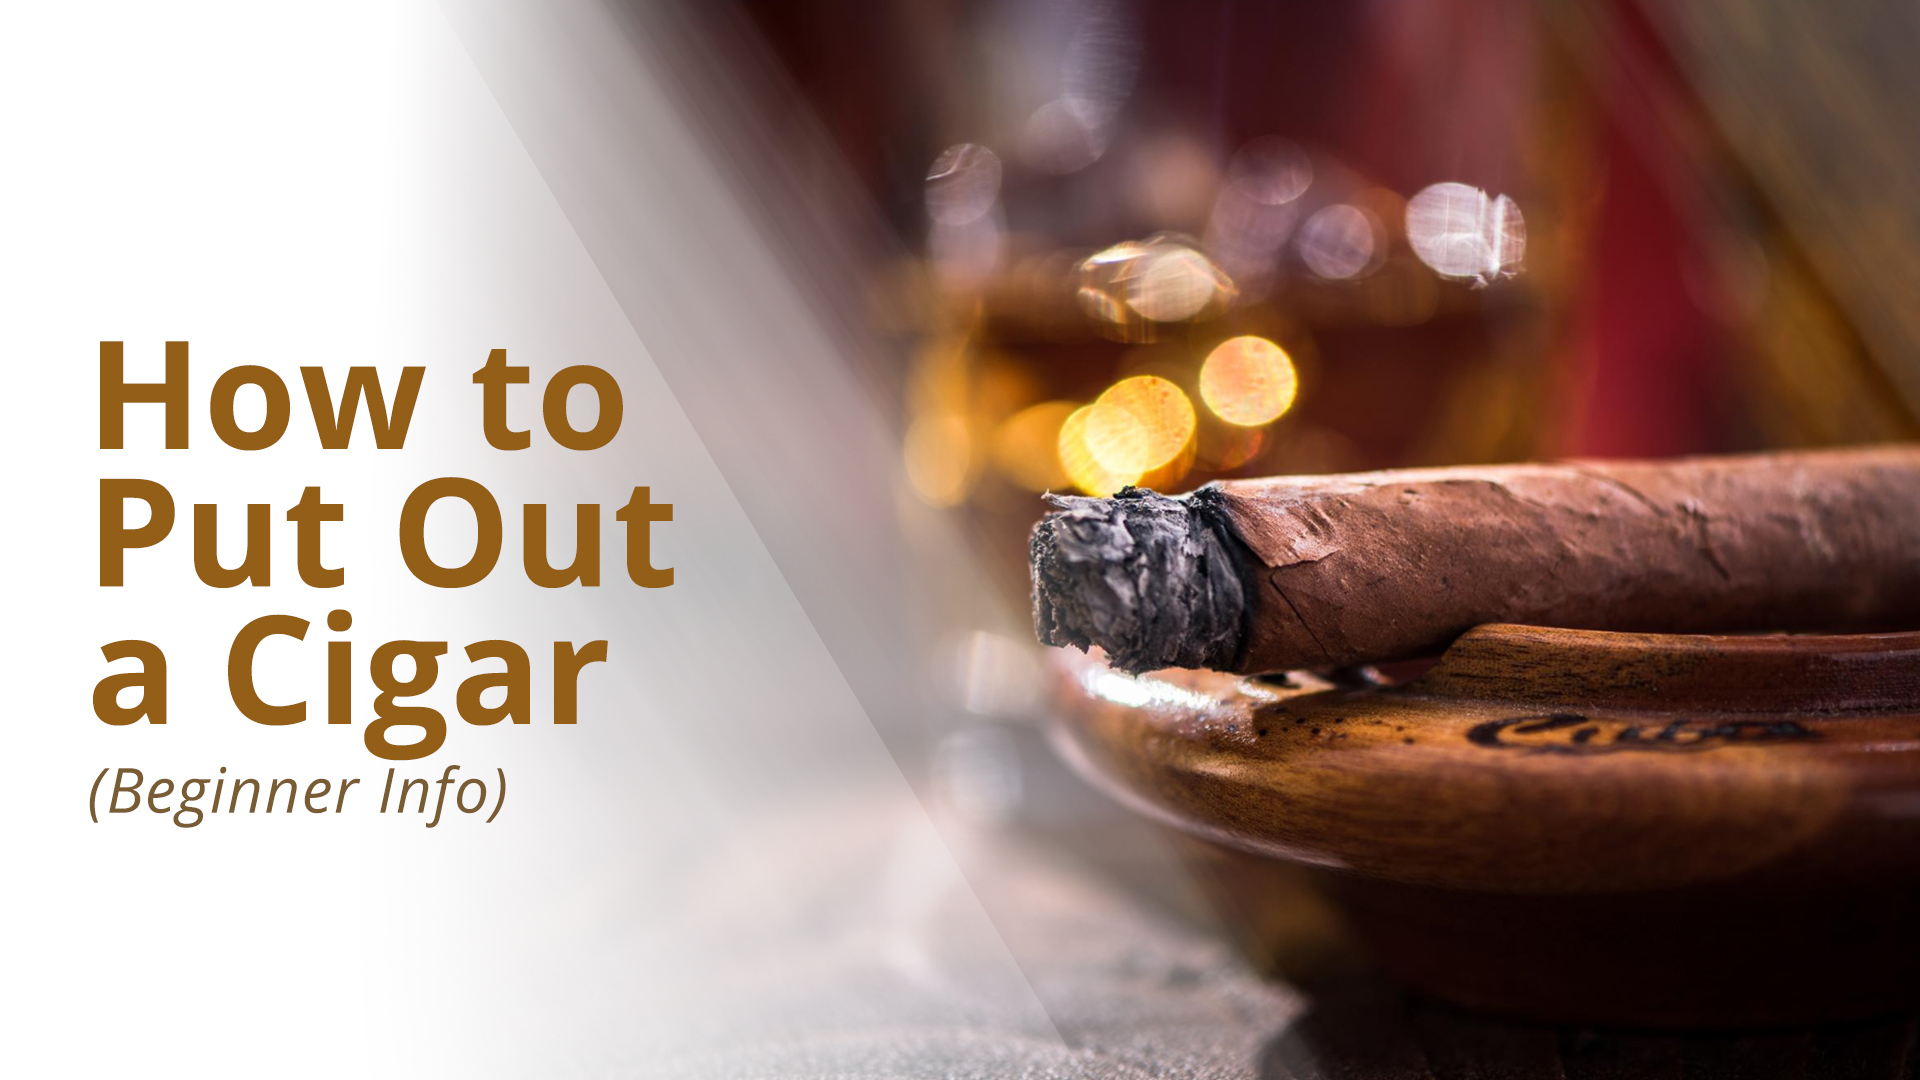 How to put out a cigar